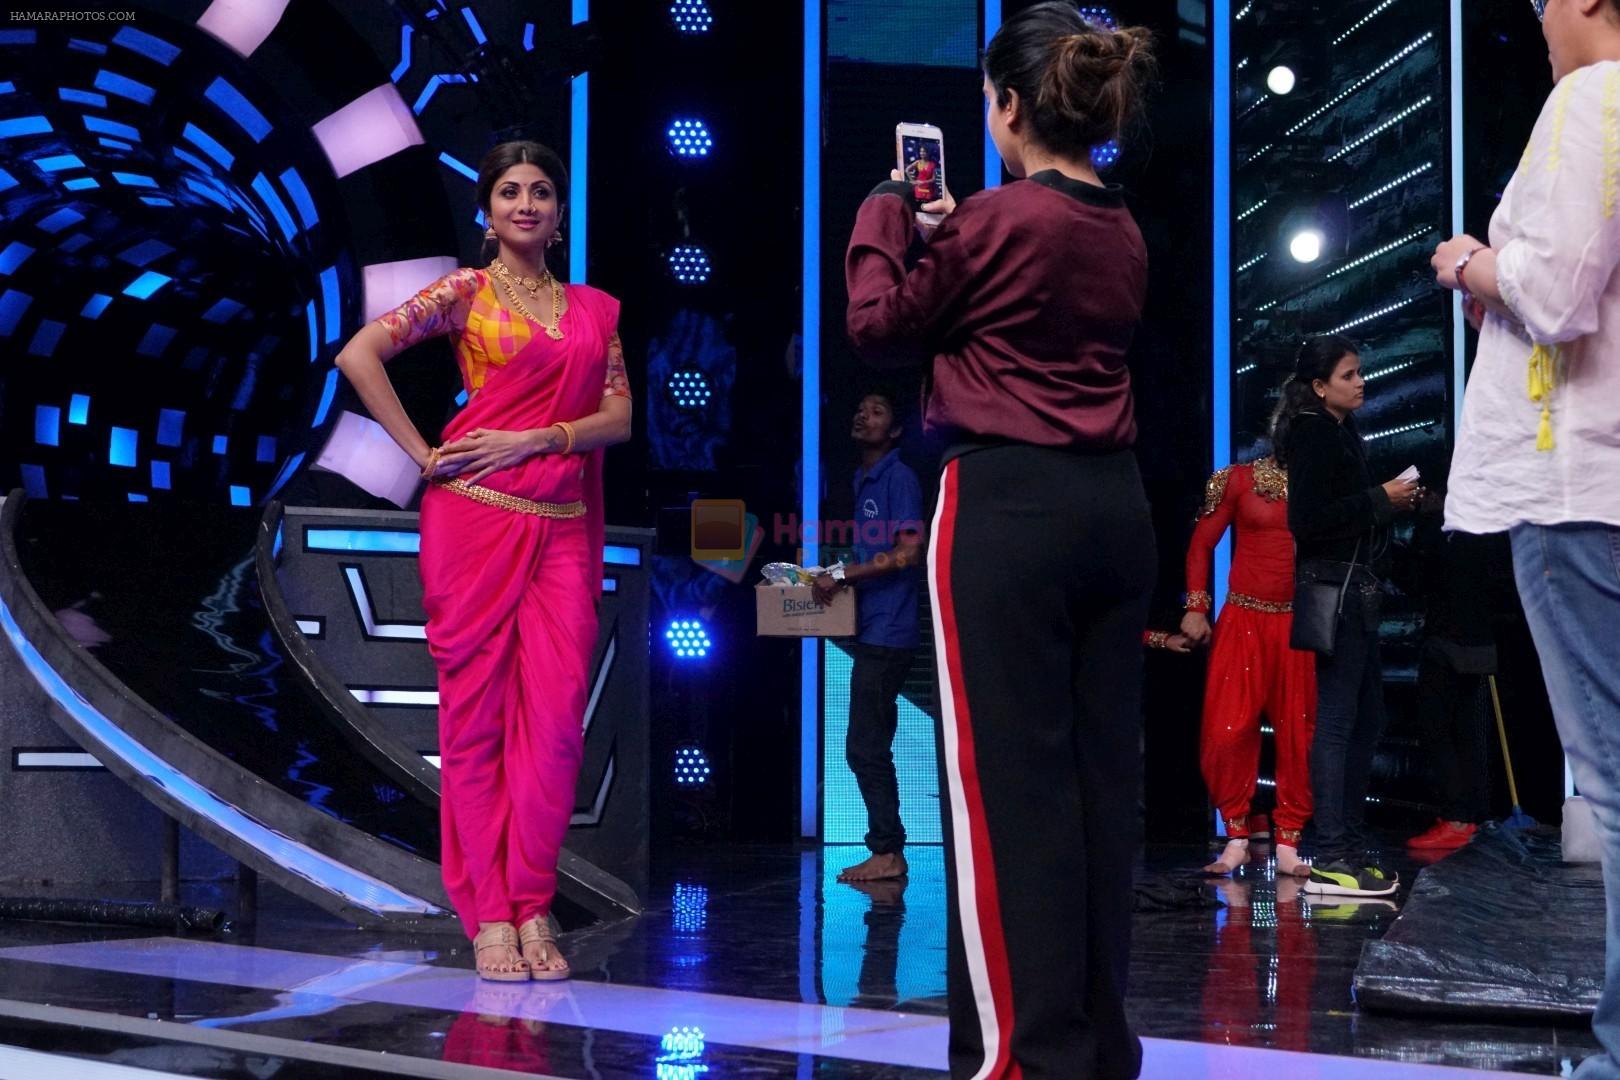 Shilpa Shetty on the sets of Super Dancer Chapter 2 on 11th Dec 2017